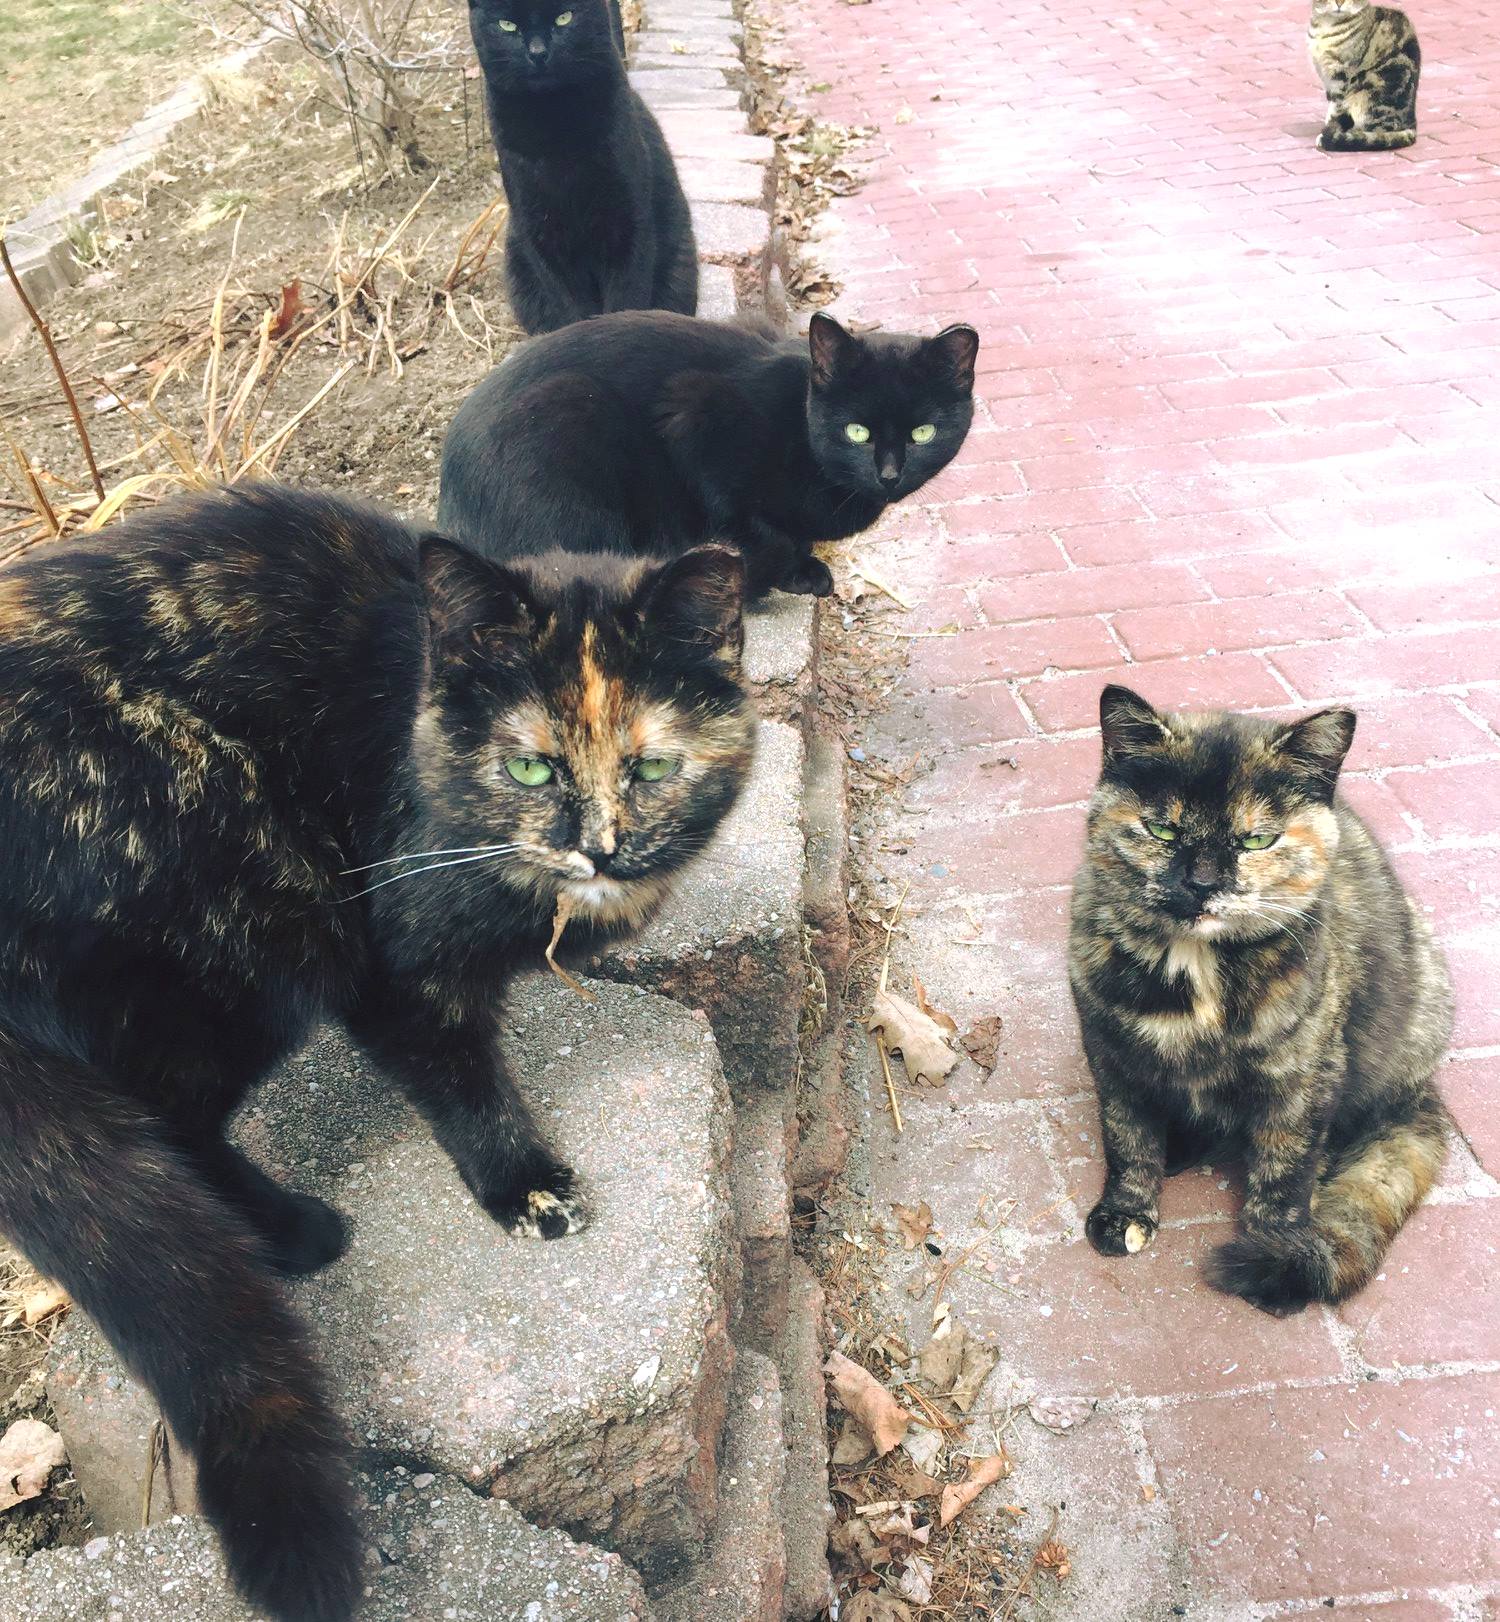 Operation Catnip helps feral cats and you can too